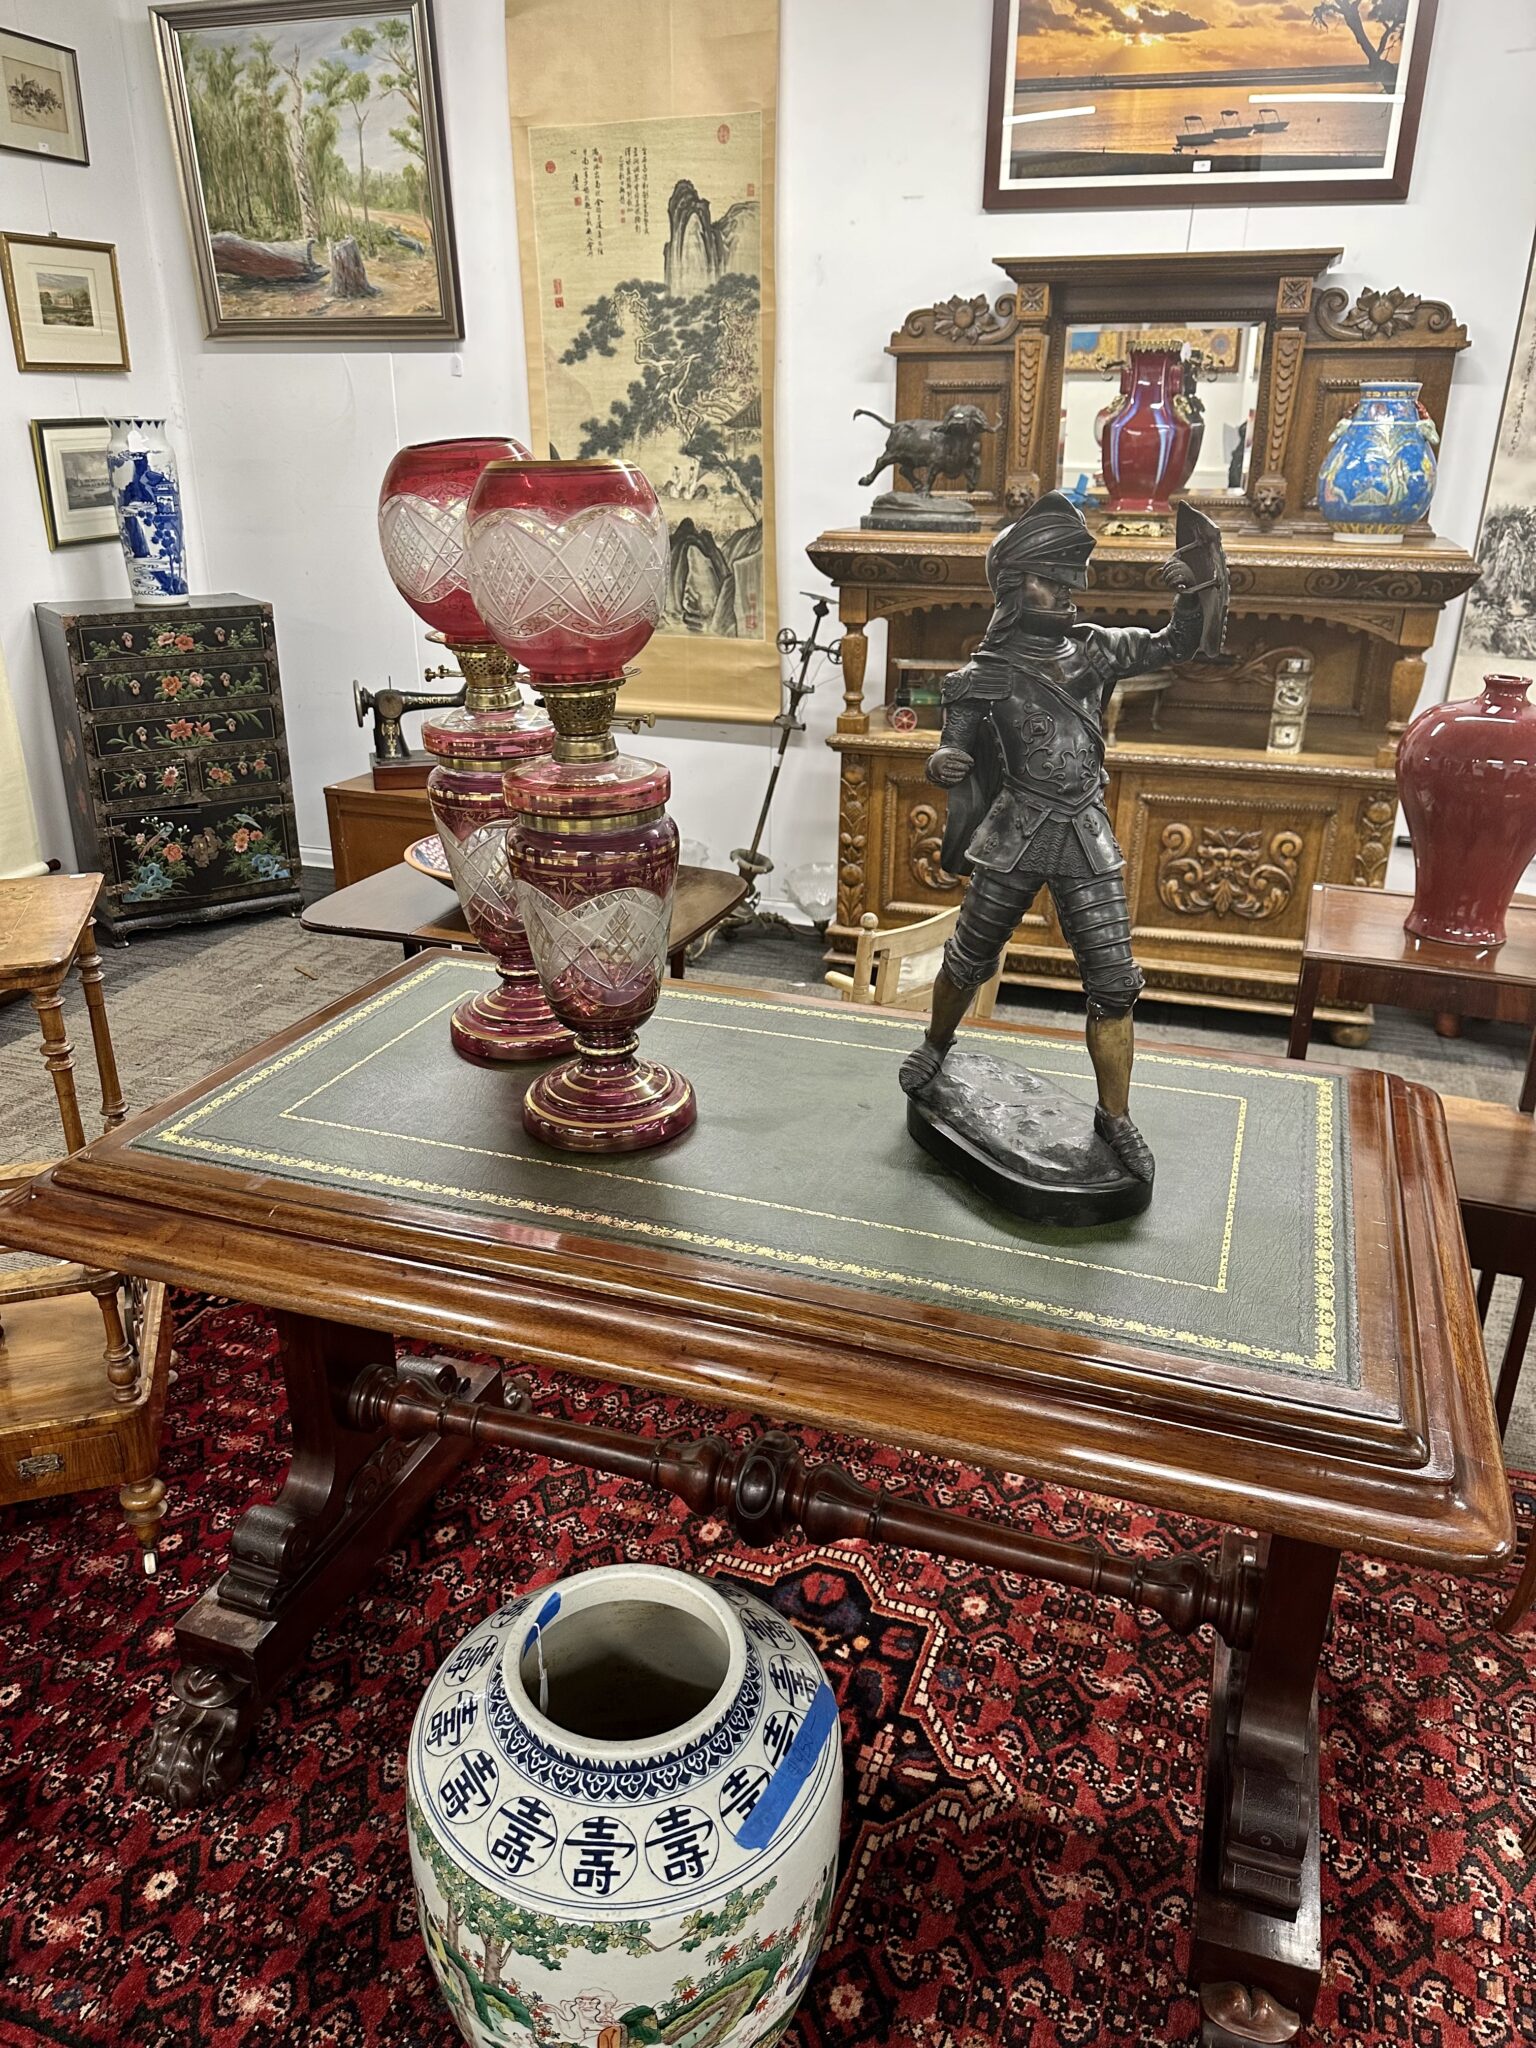 Home Donellys Auctioneers And Valuers